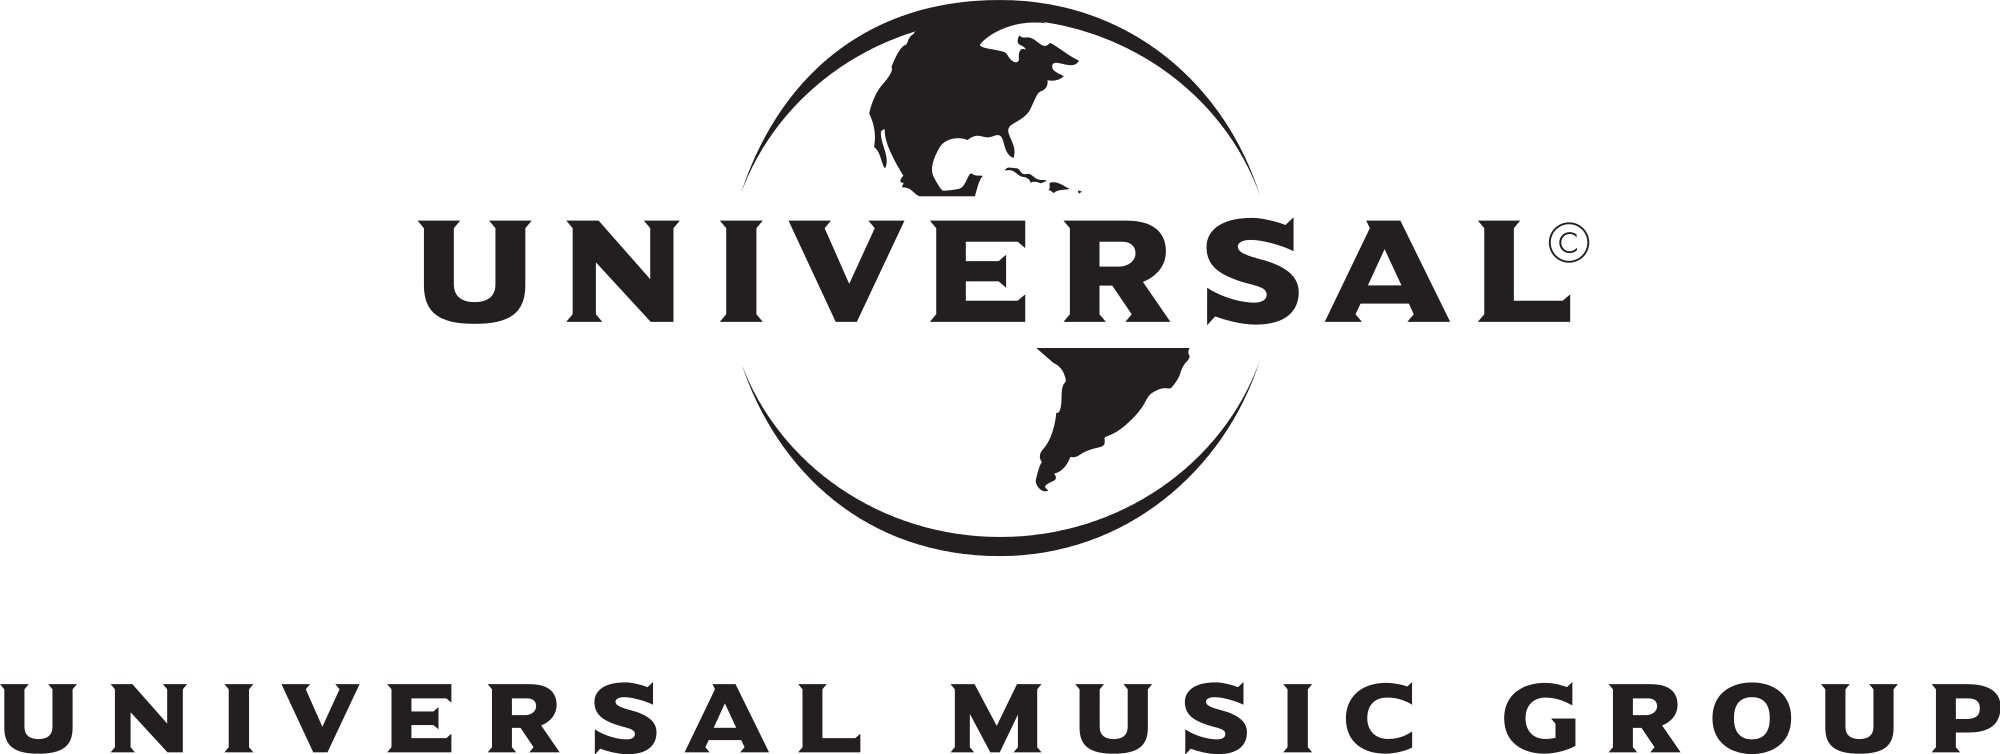 14 Universal Music Group Logo PSD Images